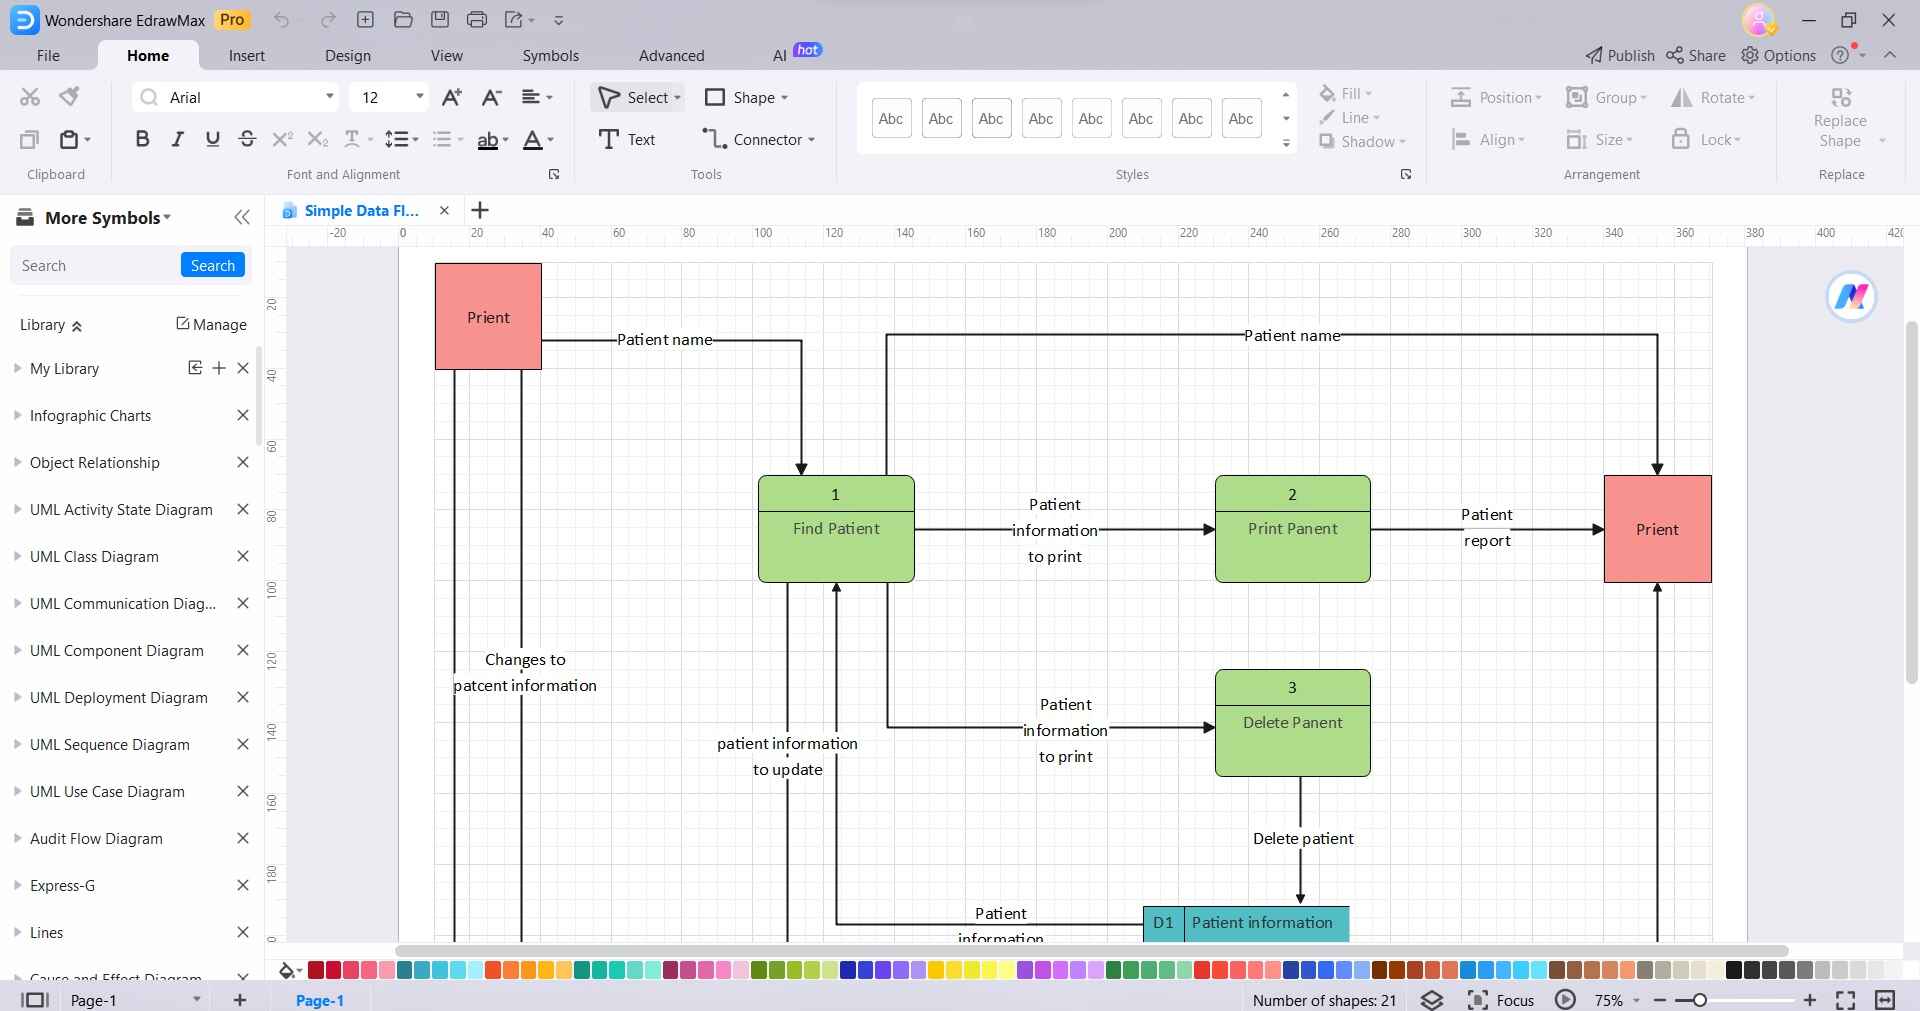 how-to-use-visio-online-editor-free-for-creative-flow-03.jpg